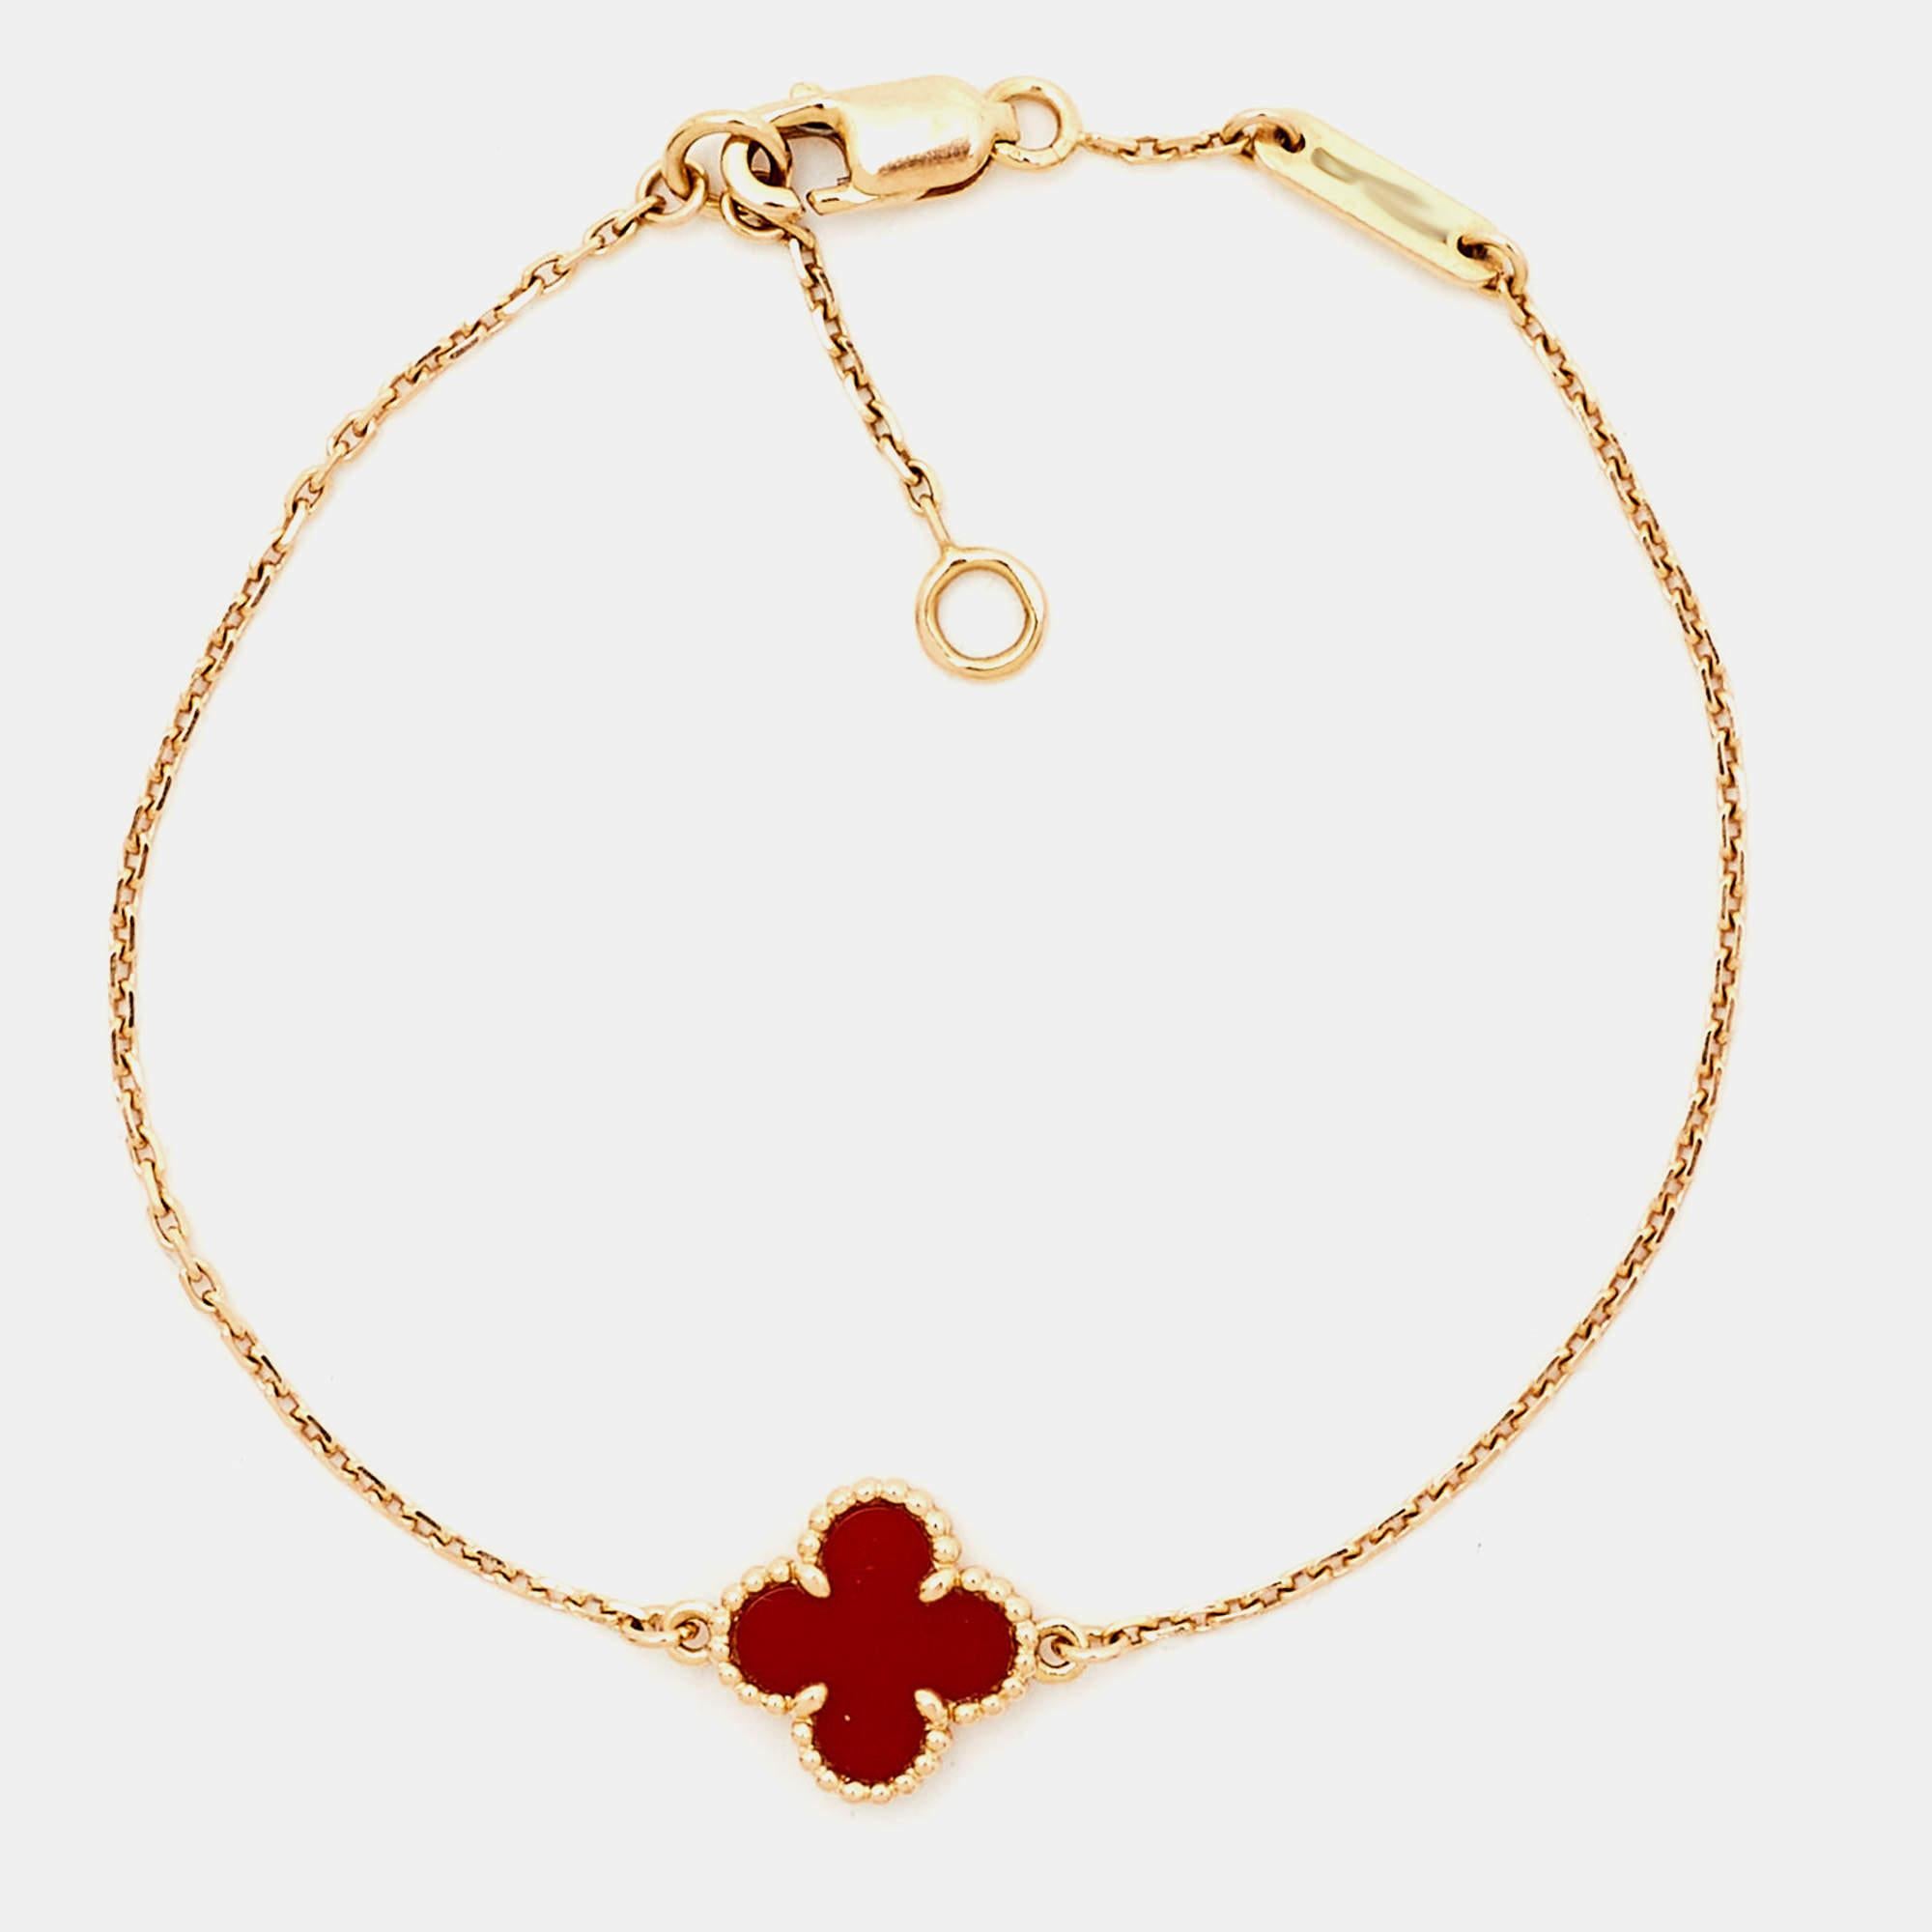 The Alhambra creations from Van Cleef & Arpels have been bringing classic style to women around the world for years that to this day, they are highly coveted. This lovely bracelet is from the Sweet Alhambra collection, and it comes crafted by hand